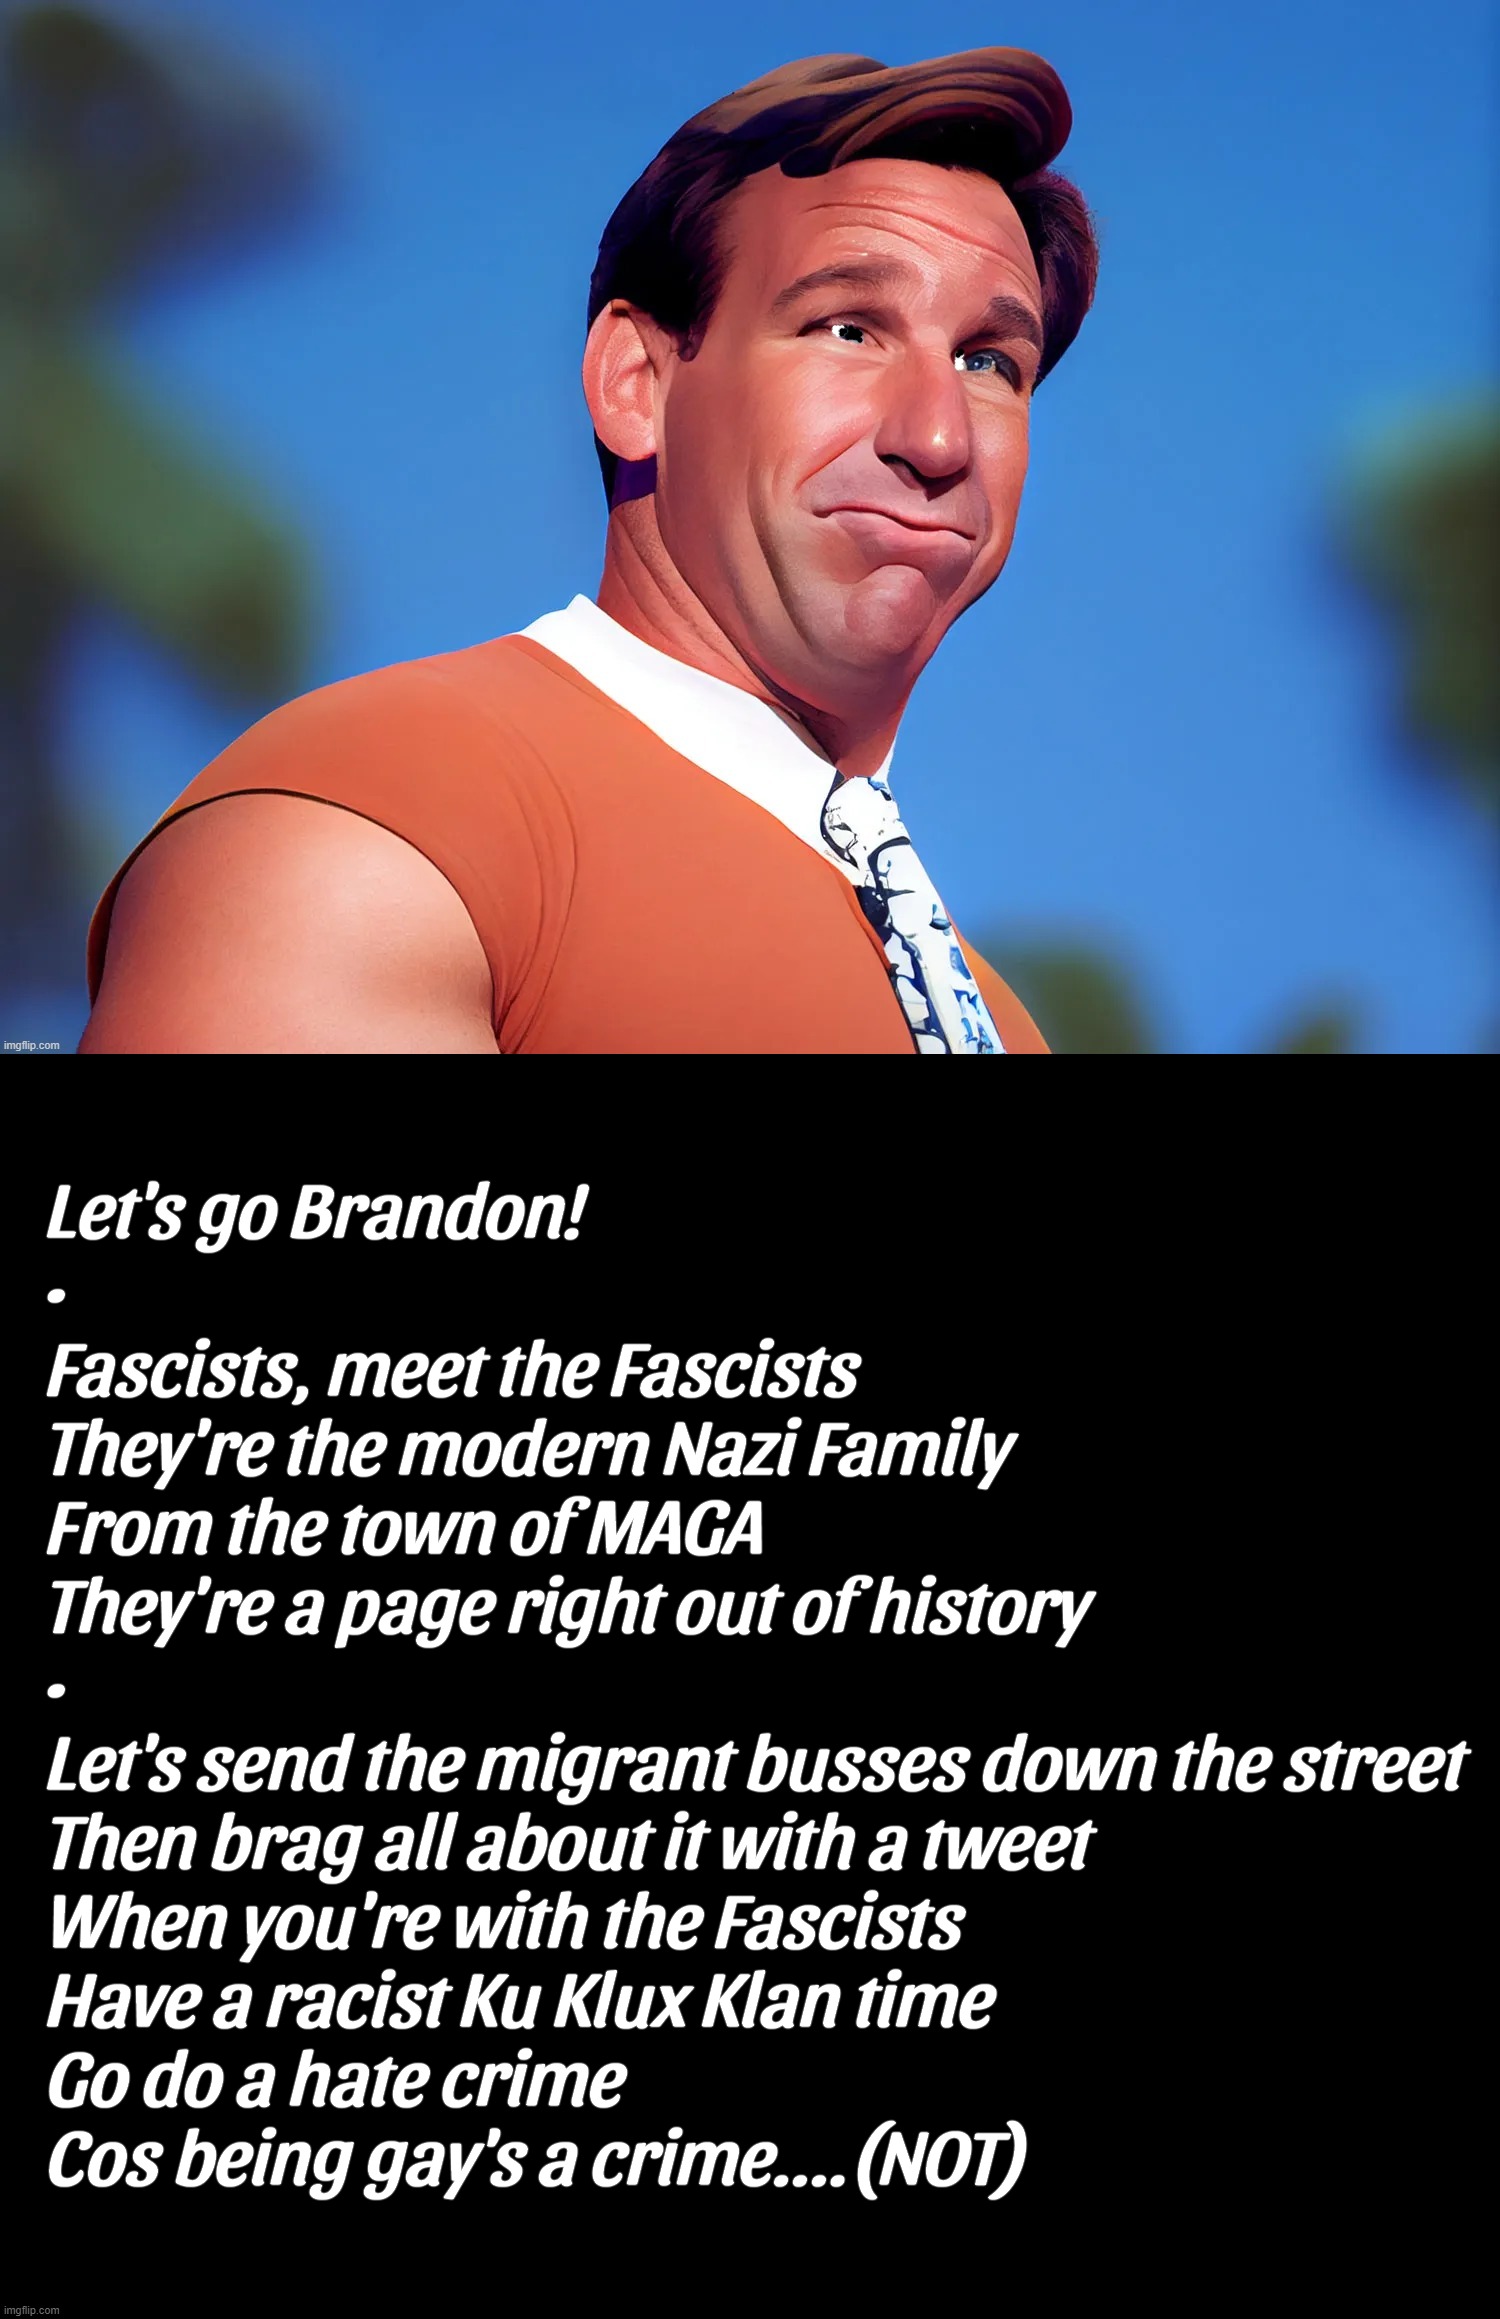 CAVE 'MAN'... | Let's go Brandon!
•
Fascists, meet the Fascists
They're the modern Nazi Family
From the town of MAGA
They're a page right out of history
•
Let's send the migrant busses down the street
Then brag all about it with a tweet
When you're with the Fascists
Have a racist Ku Klux Klan time
Go do a hate crime
Cos being gay's a crime....(NOT) | image tagged in fred flintstone,caveman,fascists,nazis,maga,traitors | made w/ Imgflip meme maker